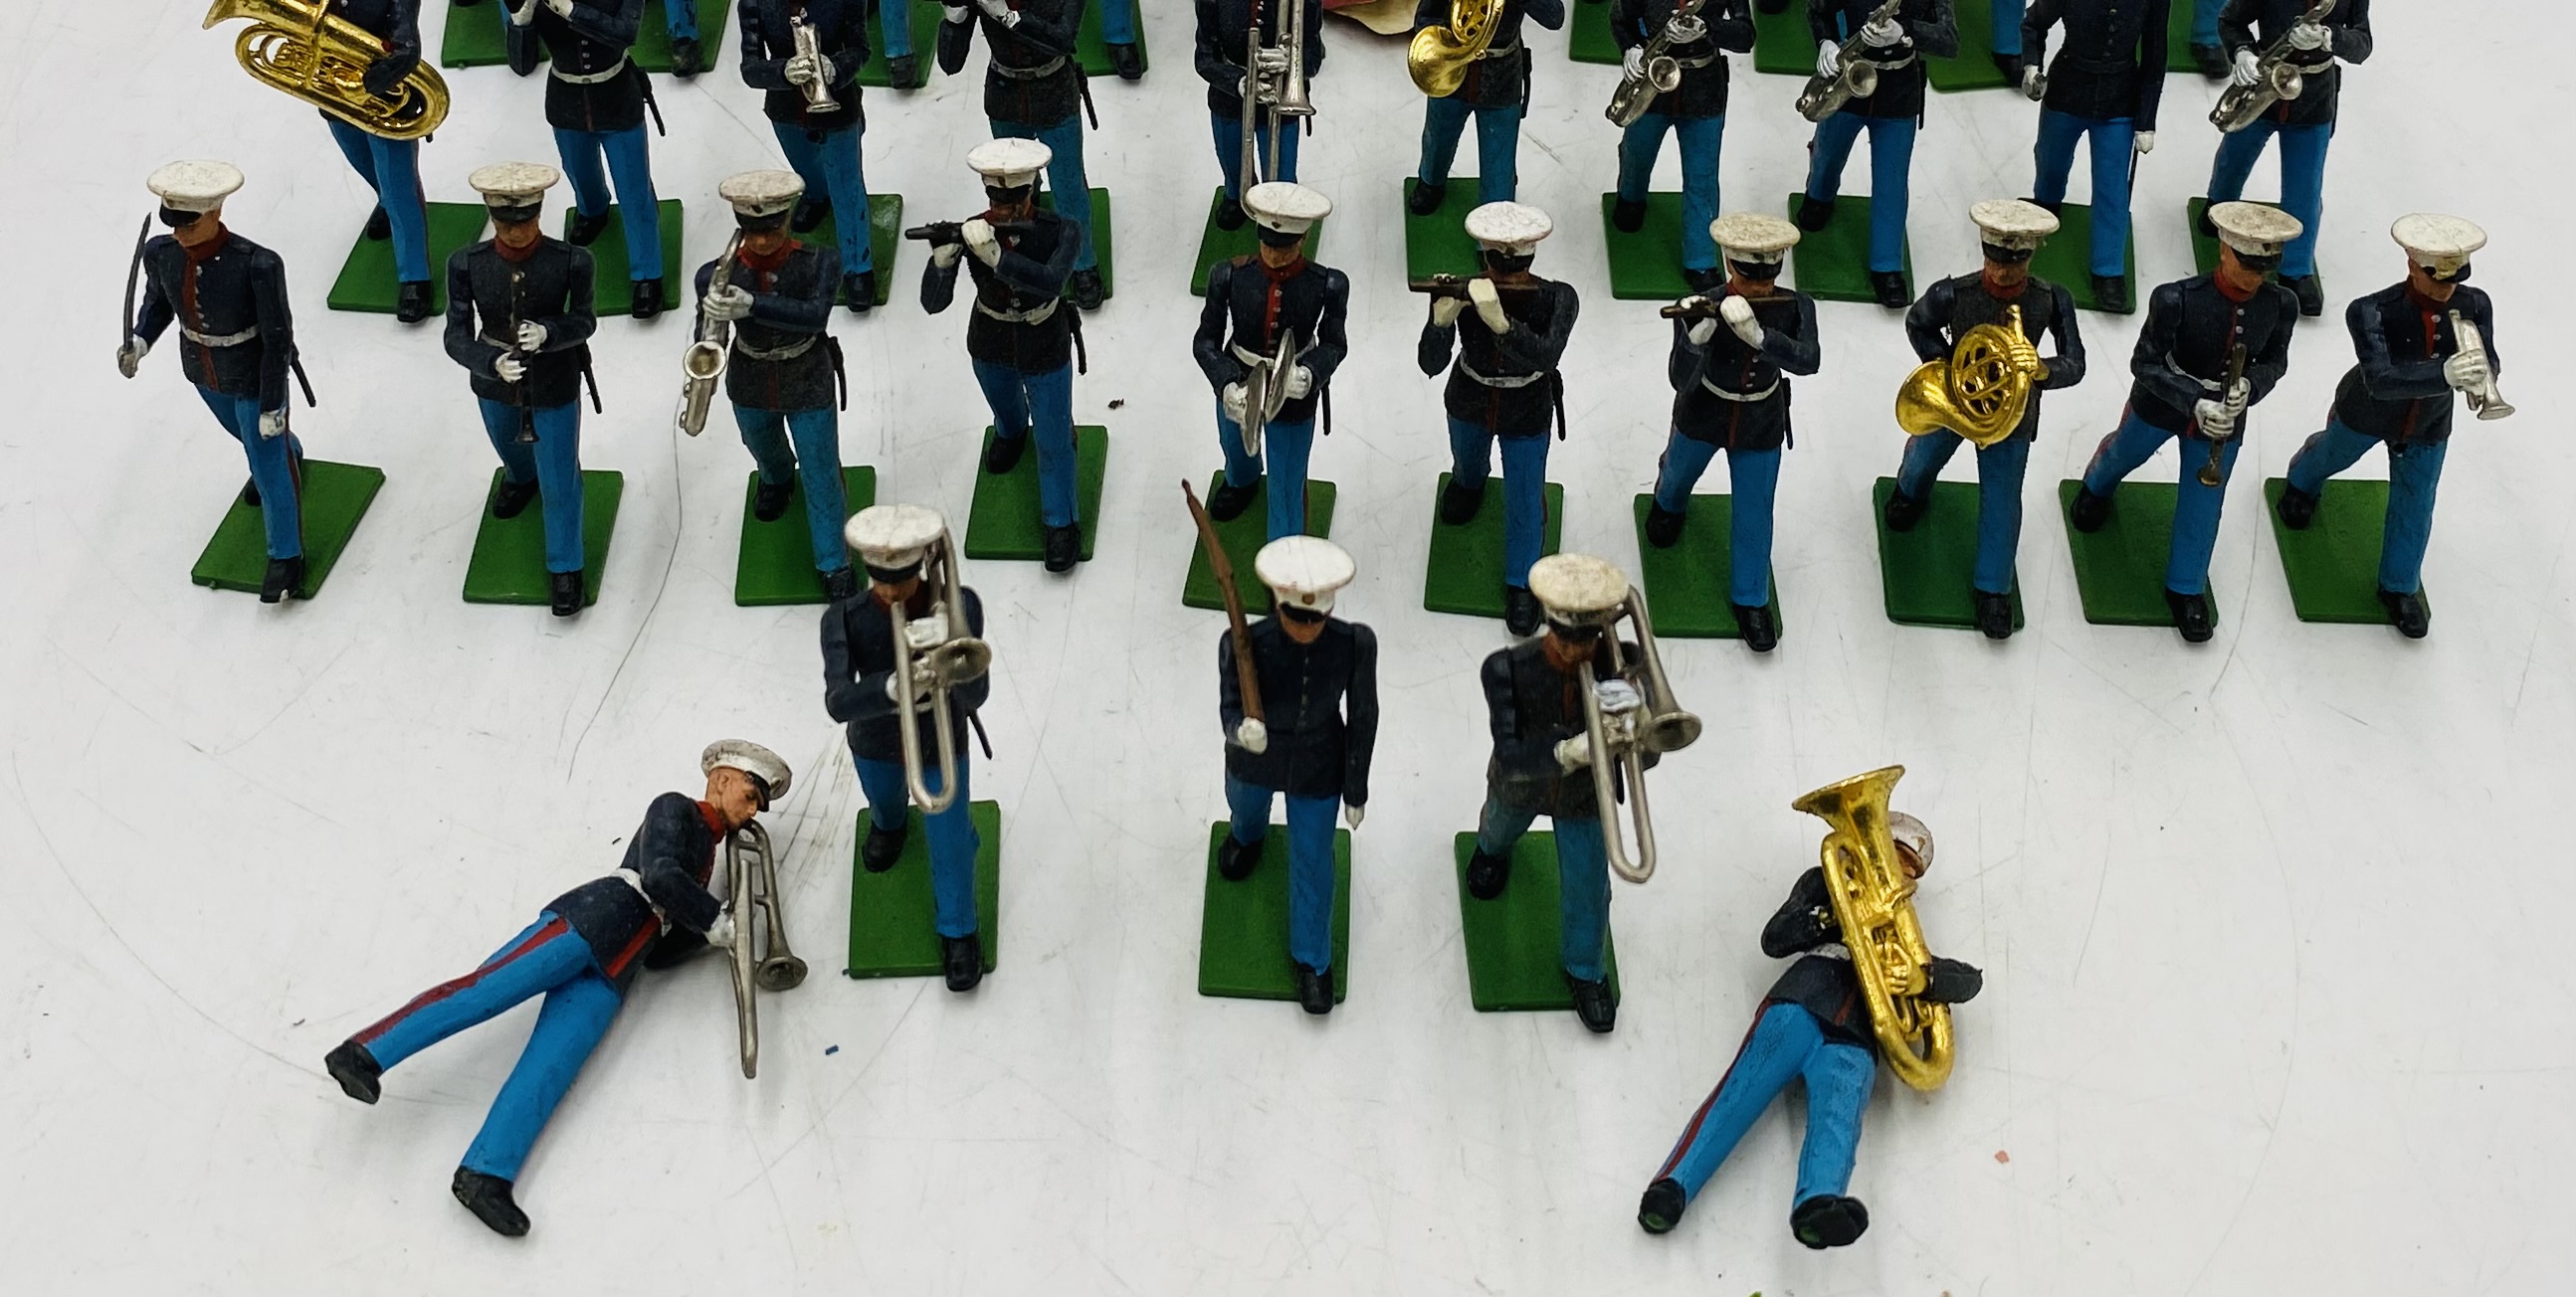 A collection of vintage Britains United States Marine Corps Military Marching Band figurines - - Image 3 of 5